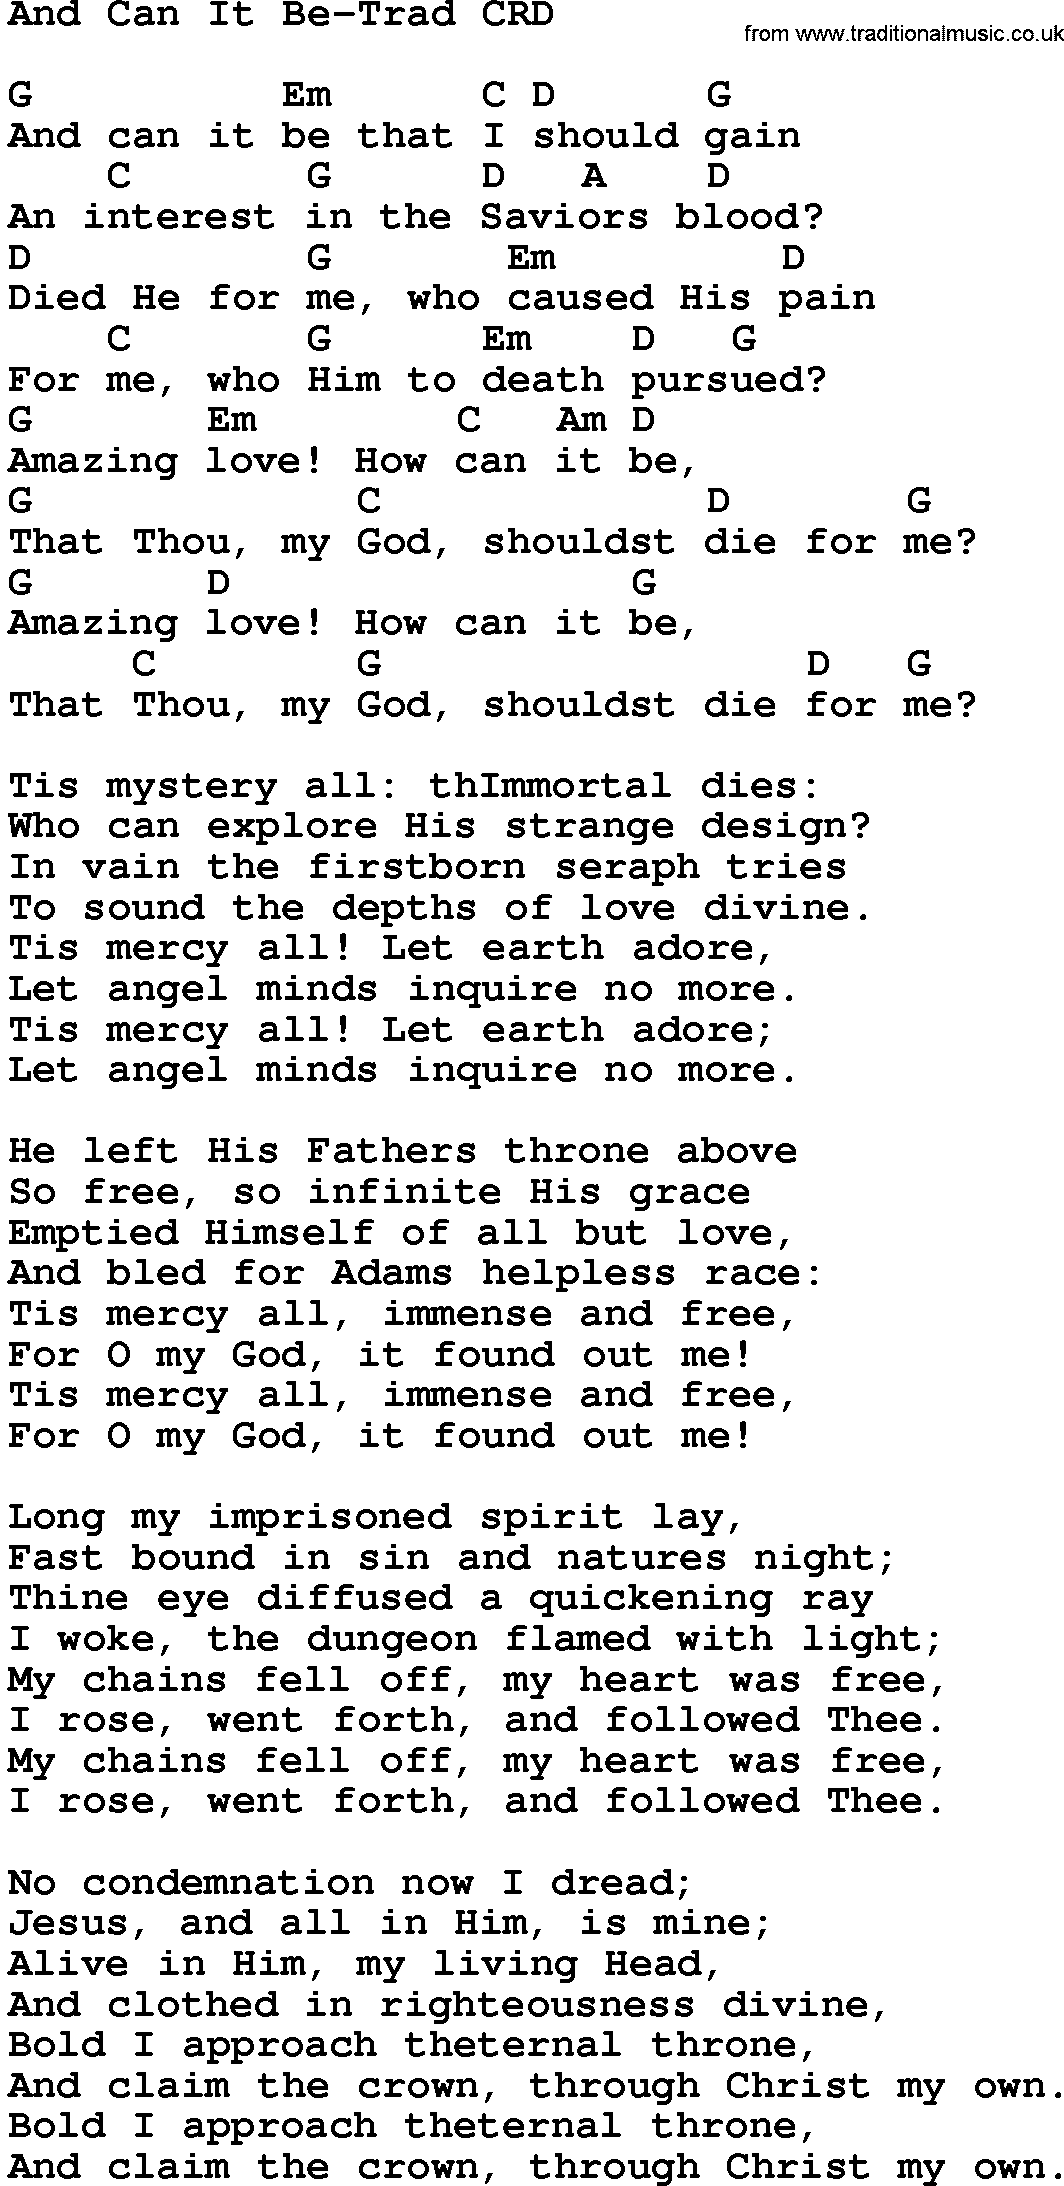 Gospel Song: And Can It Be-Trad, lyrics and chords.